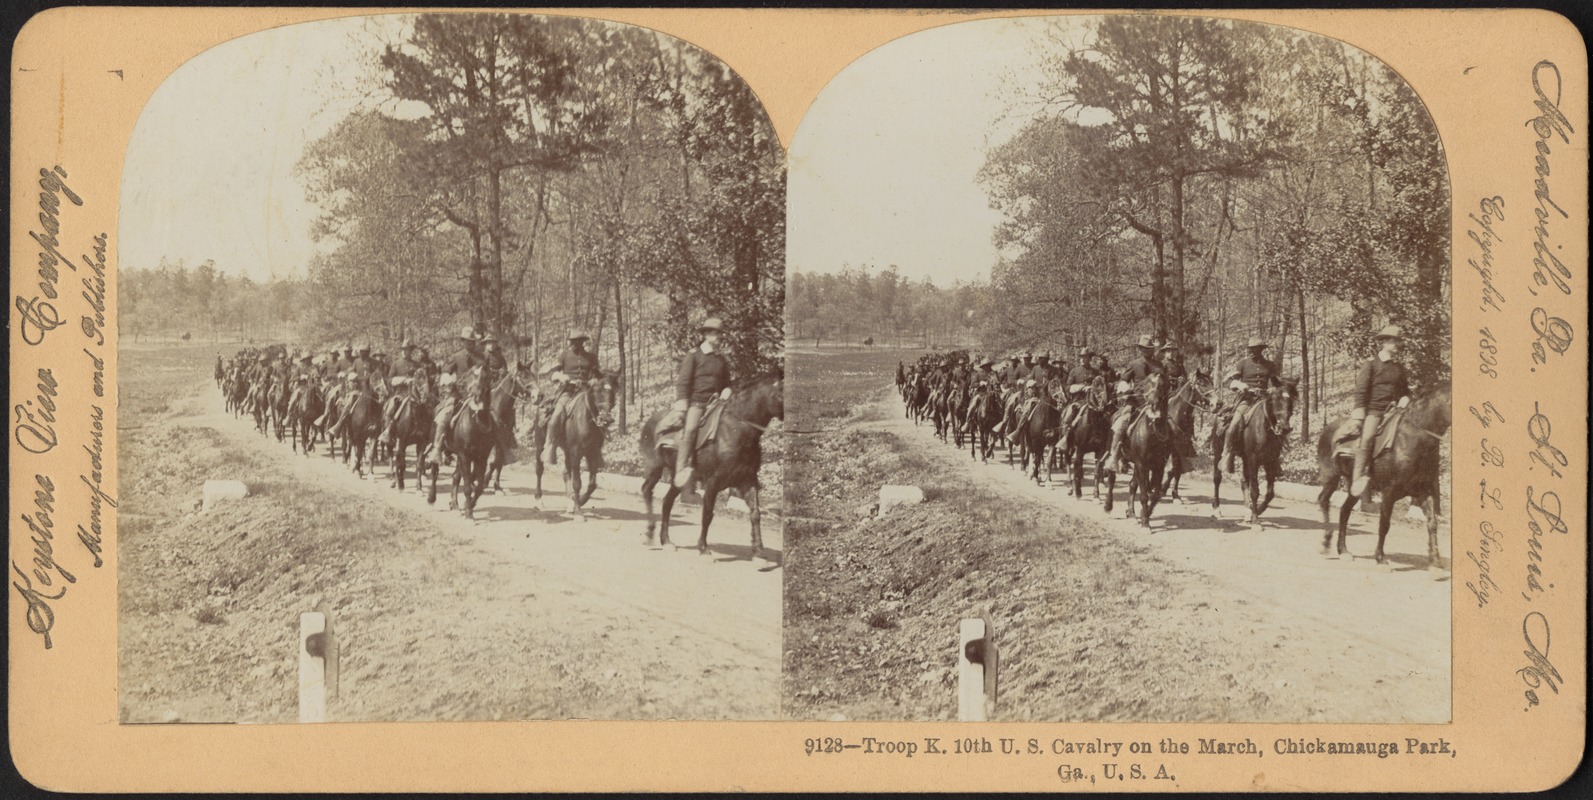 Troop K. 10th U.S. Cavalry on the march, Chickamauga Park, Ga., U.S.A.